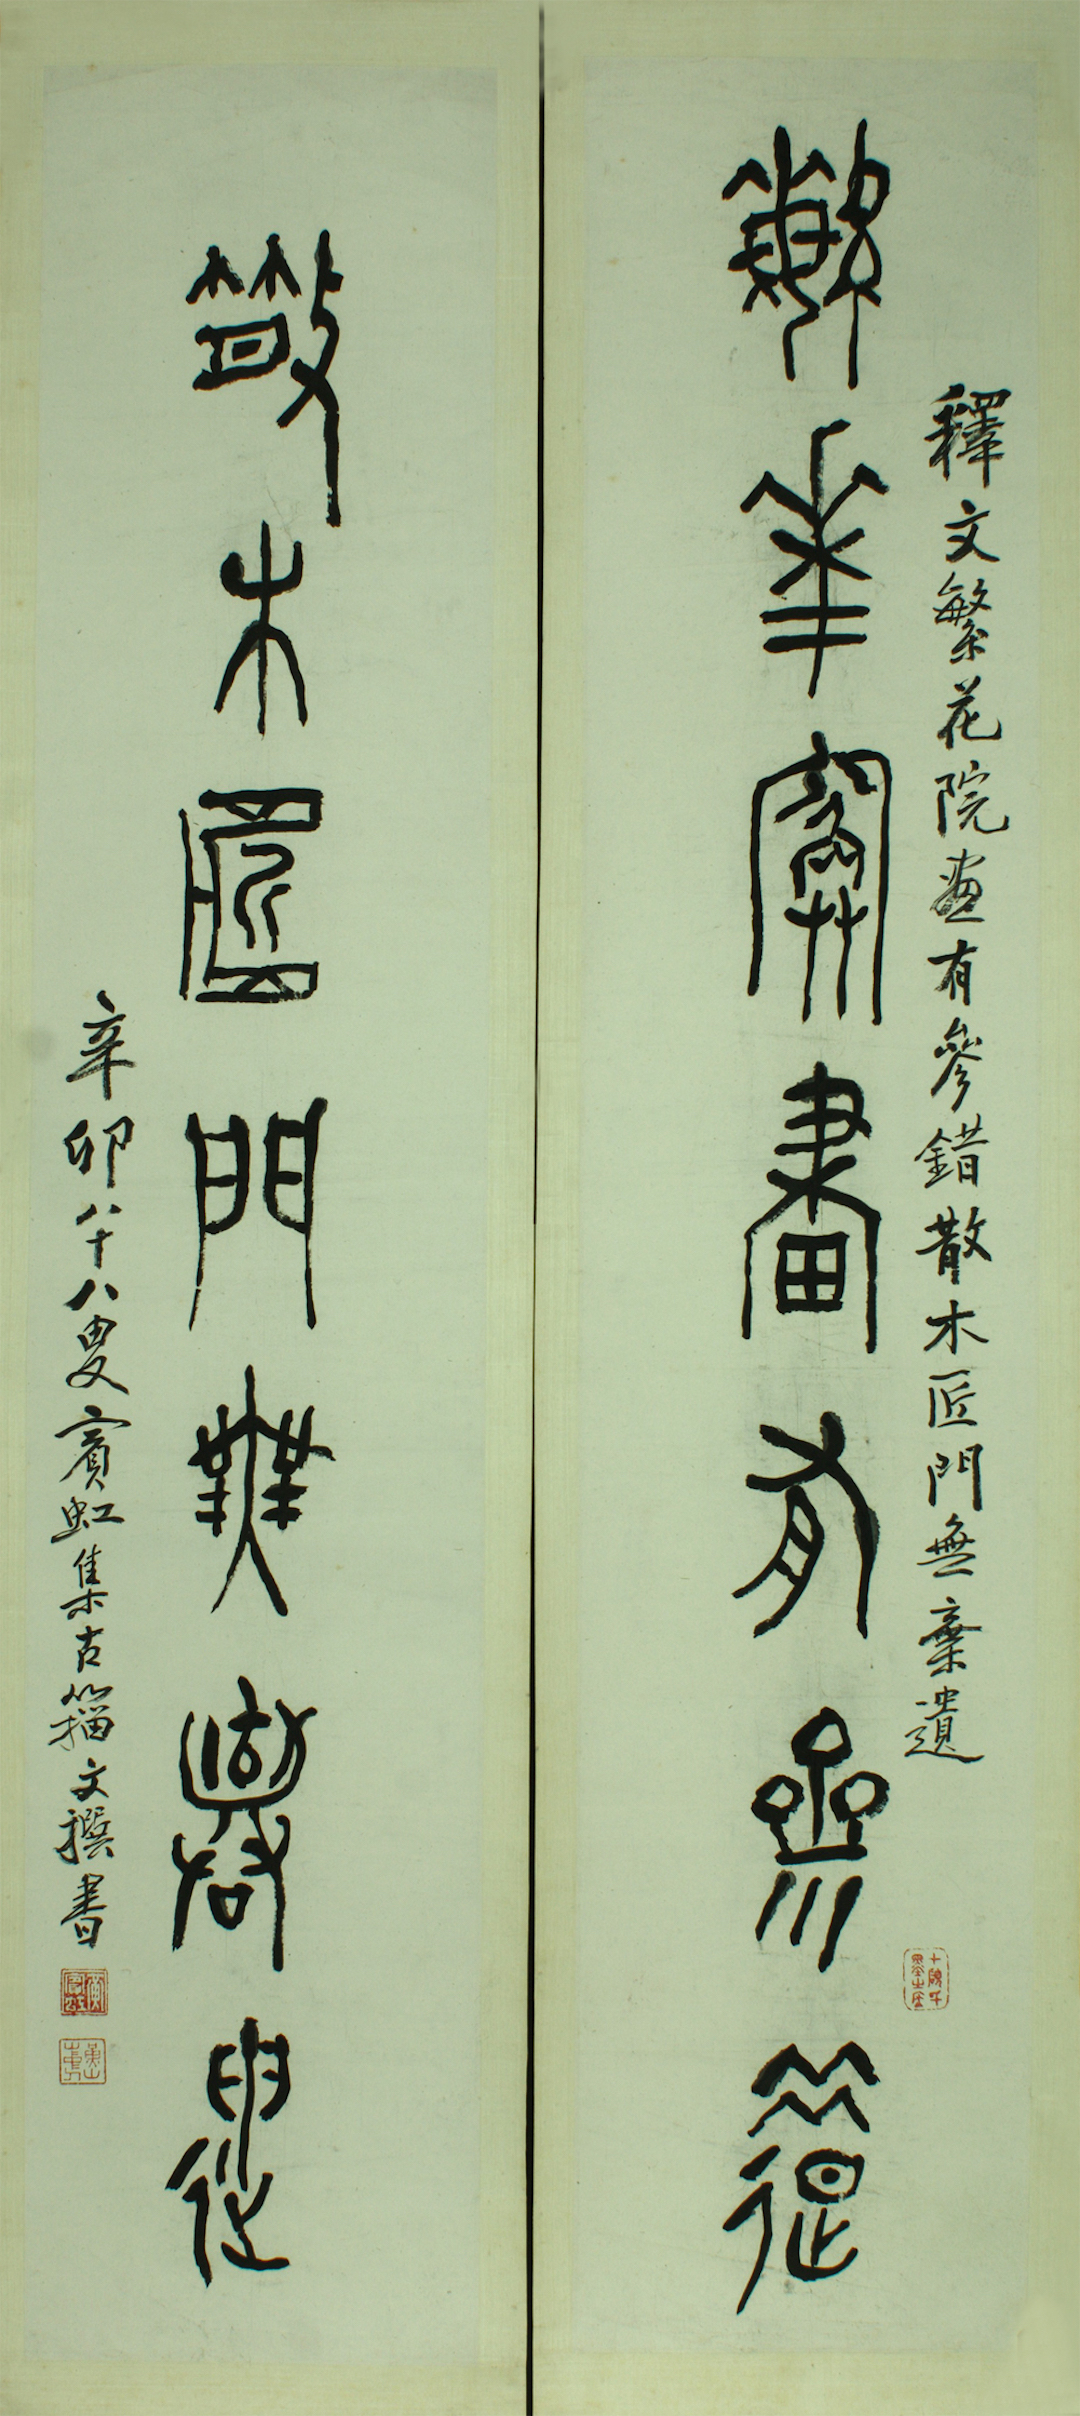 In 1951, Huang Binhong collected the seven-character couplet of "Blossoming Flowers and Scattering Trees" in ancient Xianwen